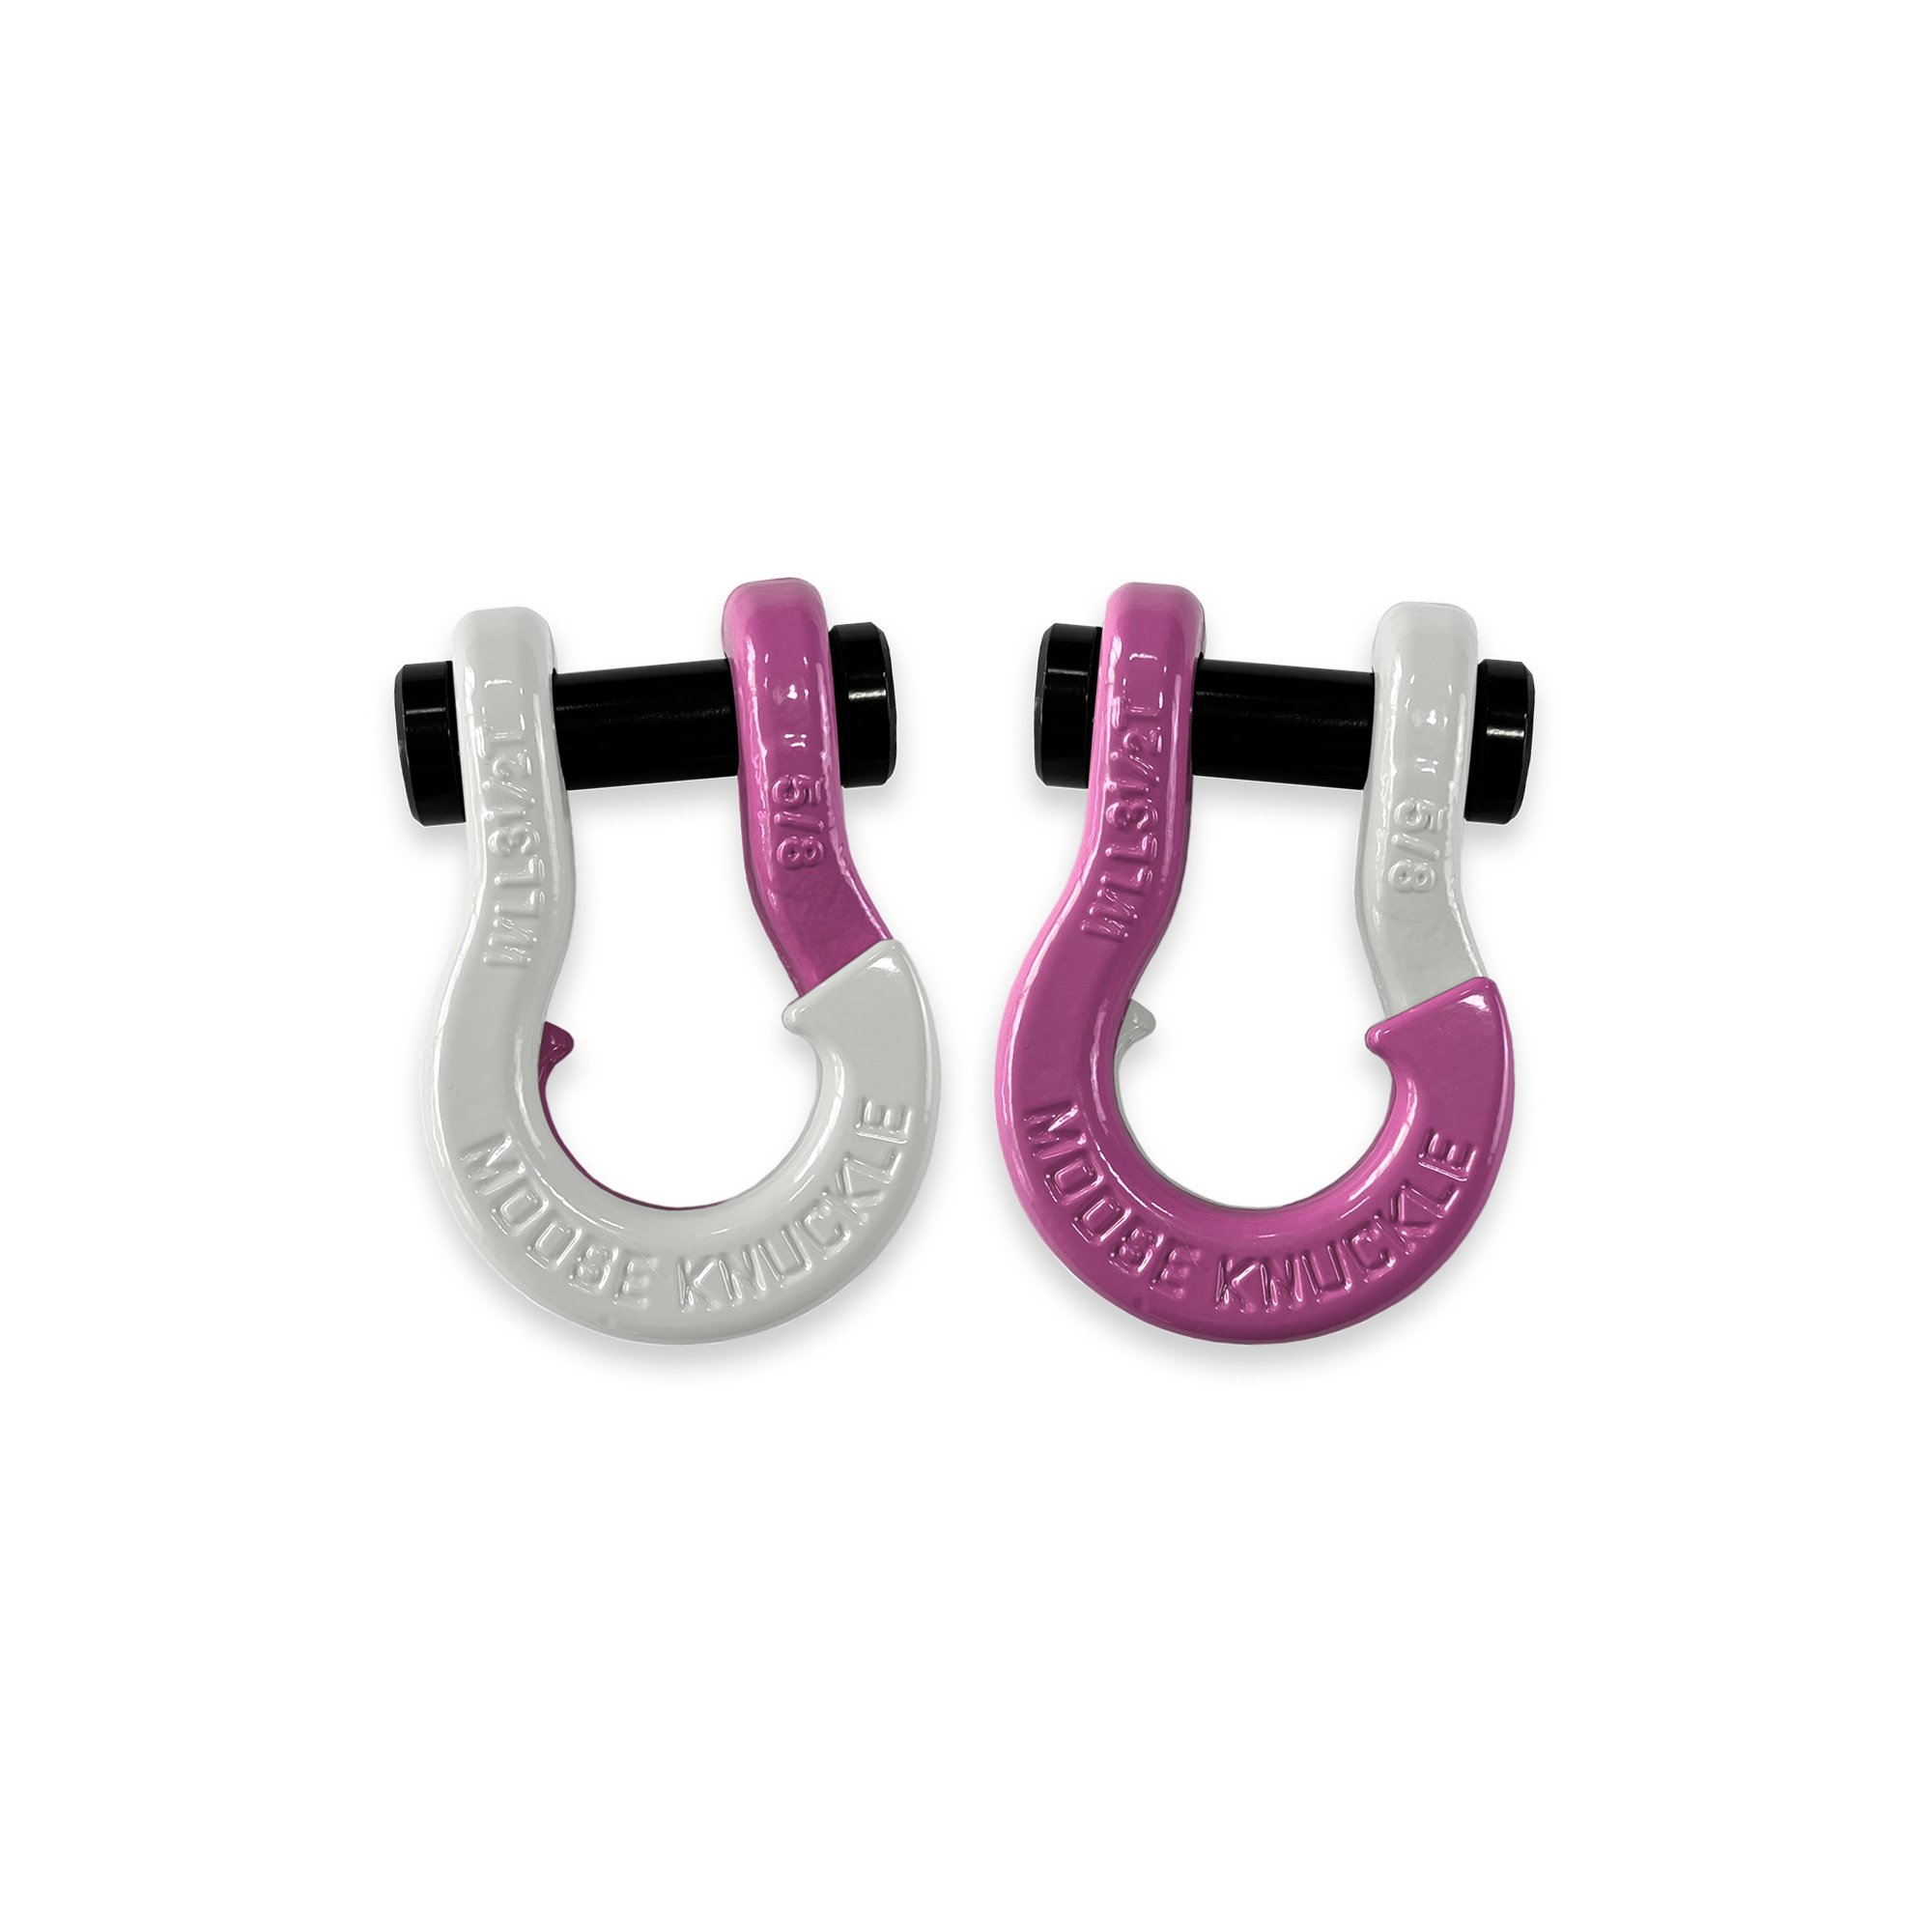 Moose Knuckle Offroad, 5/8 Split Shackle Pure White / Pretty Pink, Working Load Limit 7000 lb, Model FN000025-049